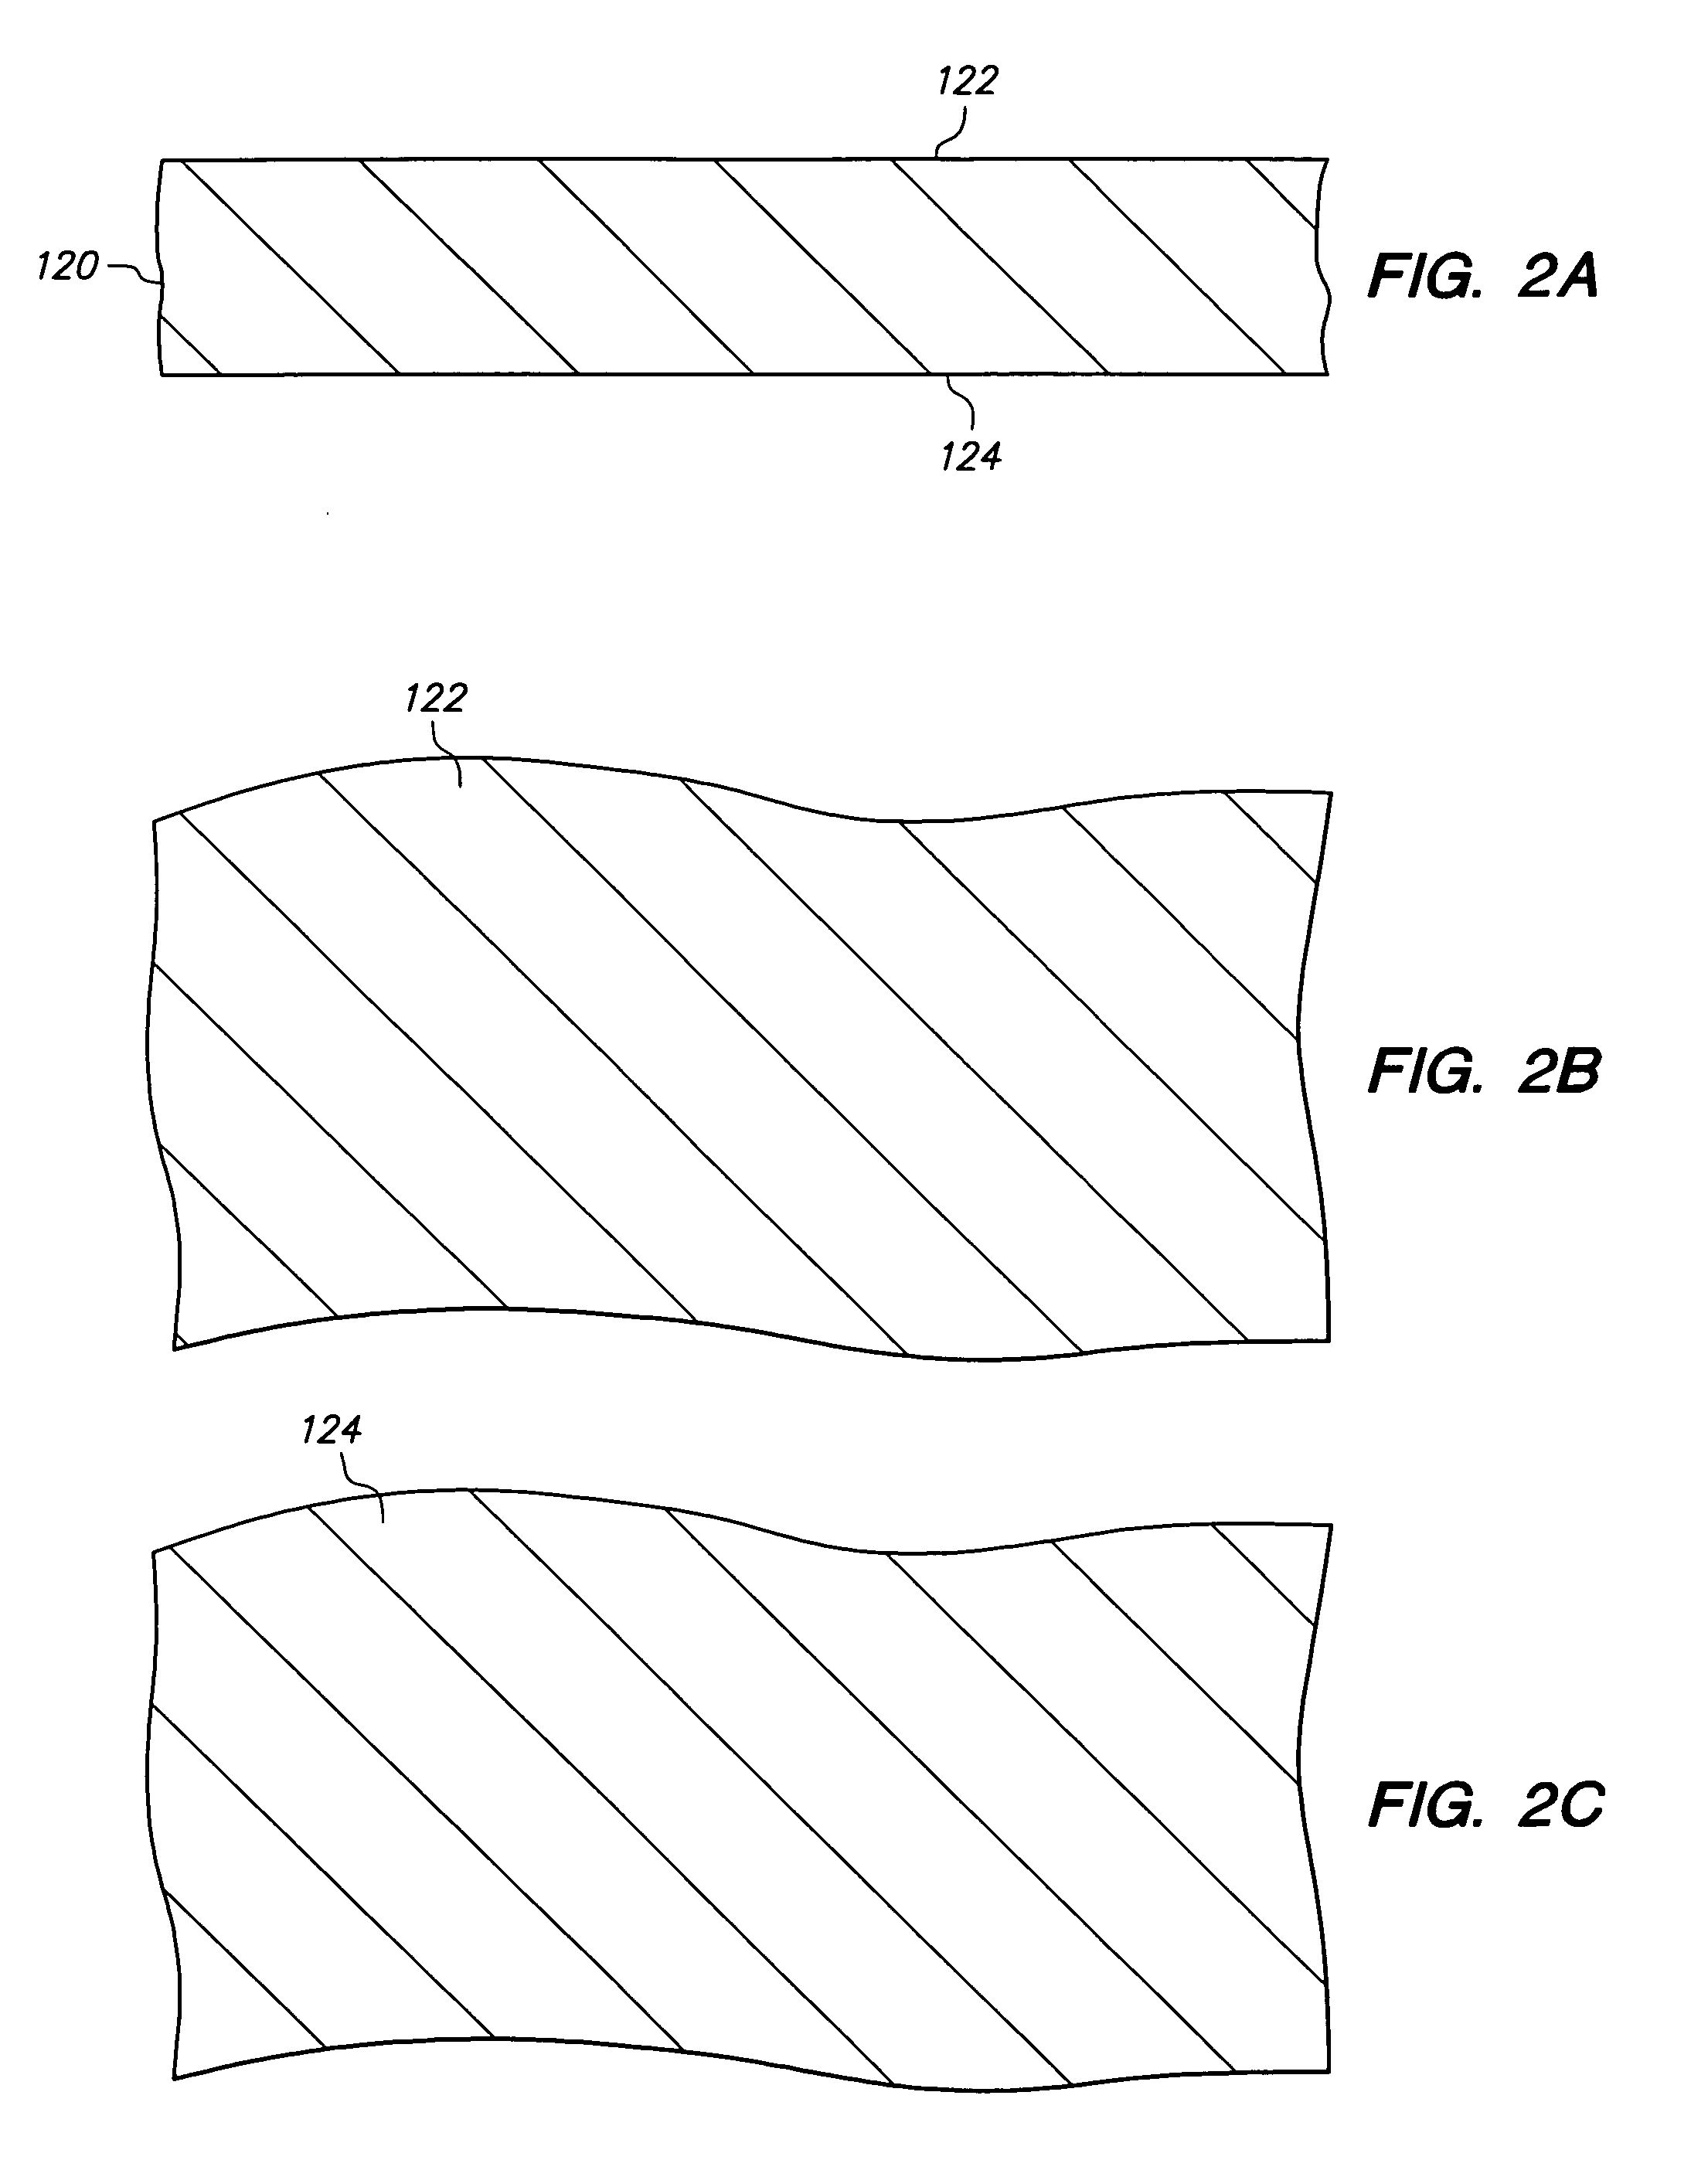 Method of making a semiconductor chip assembly with a bumped metal pillar